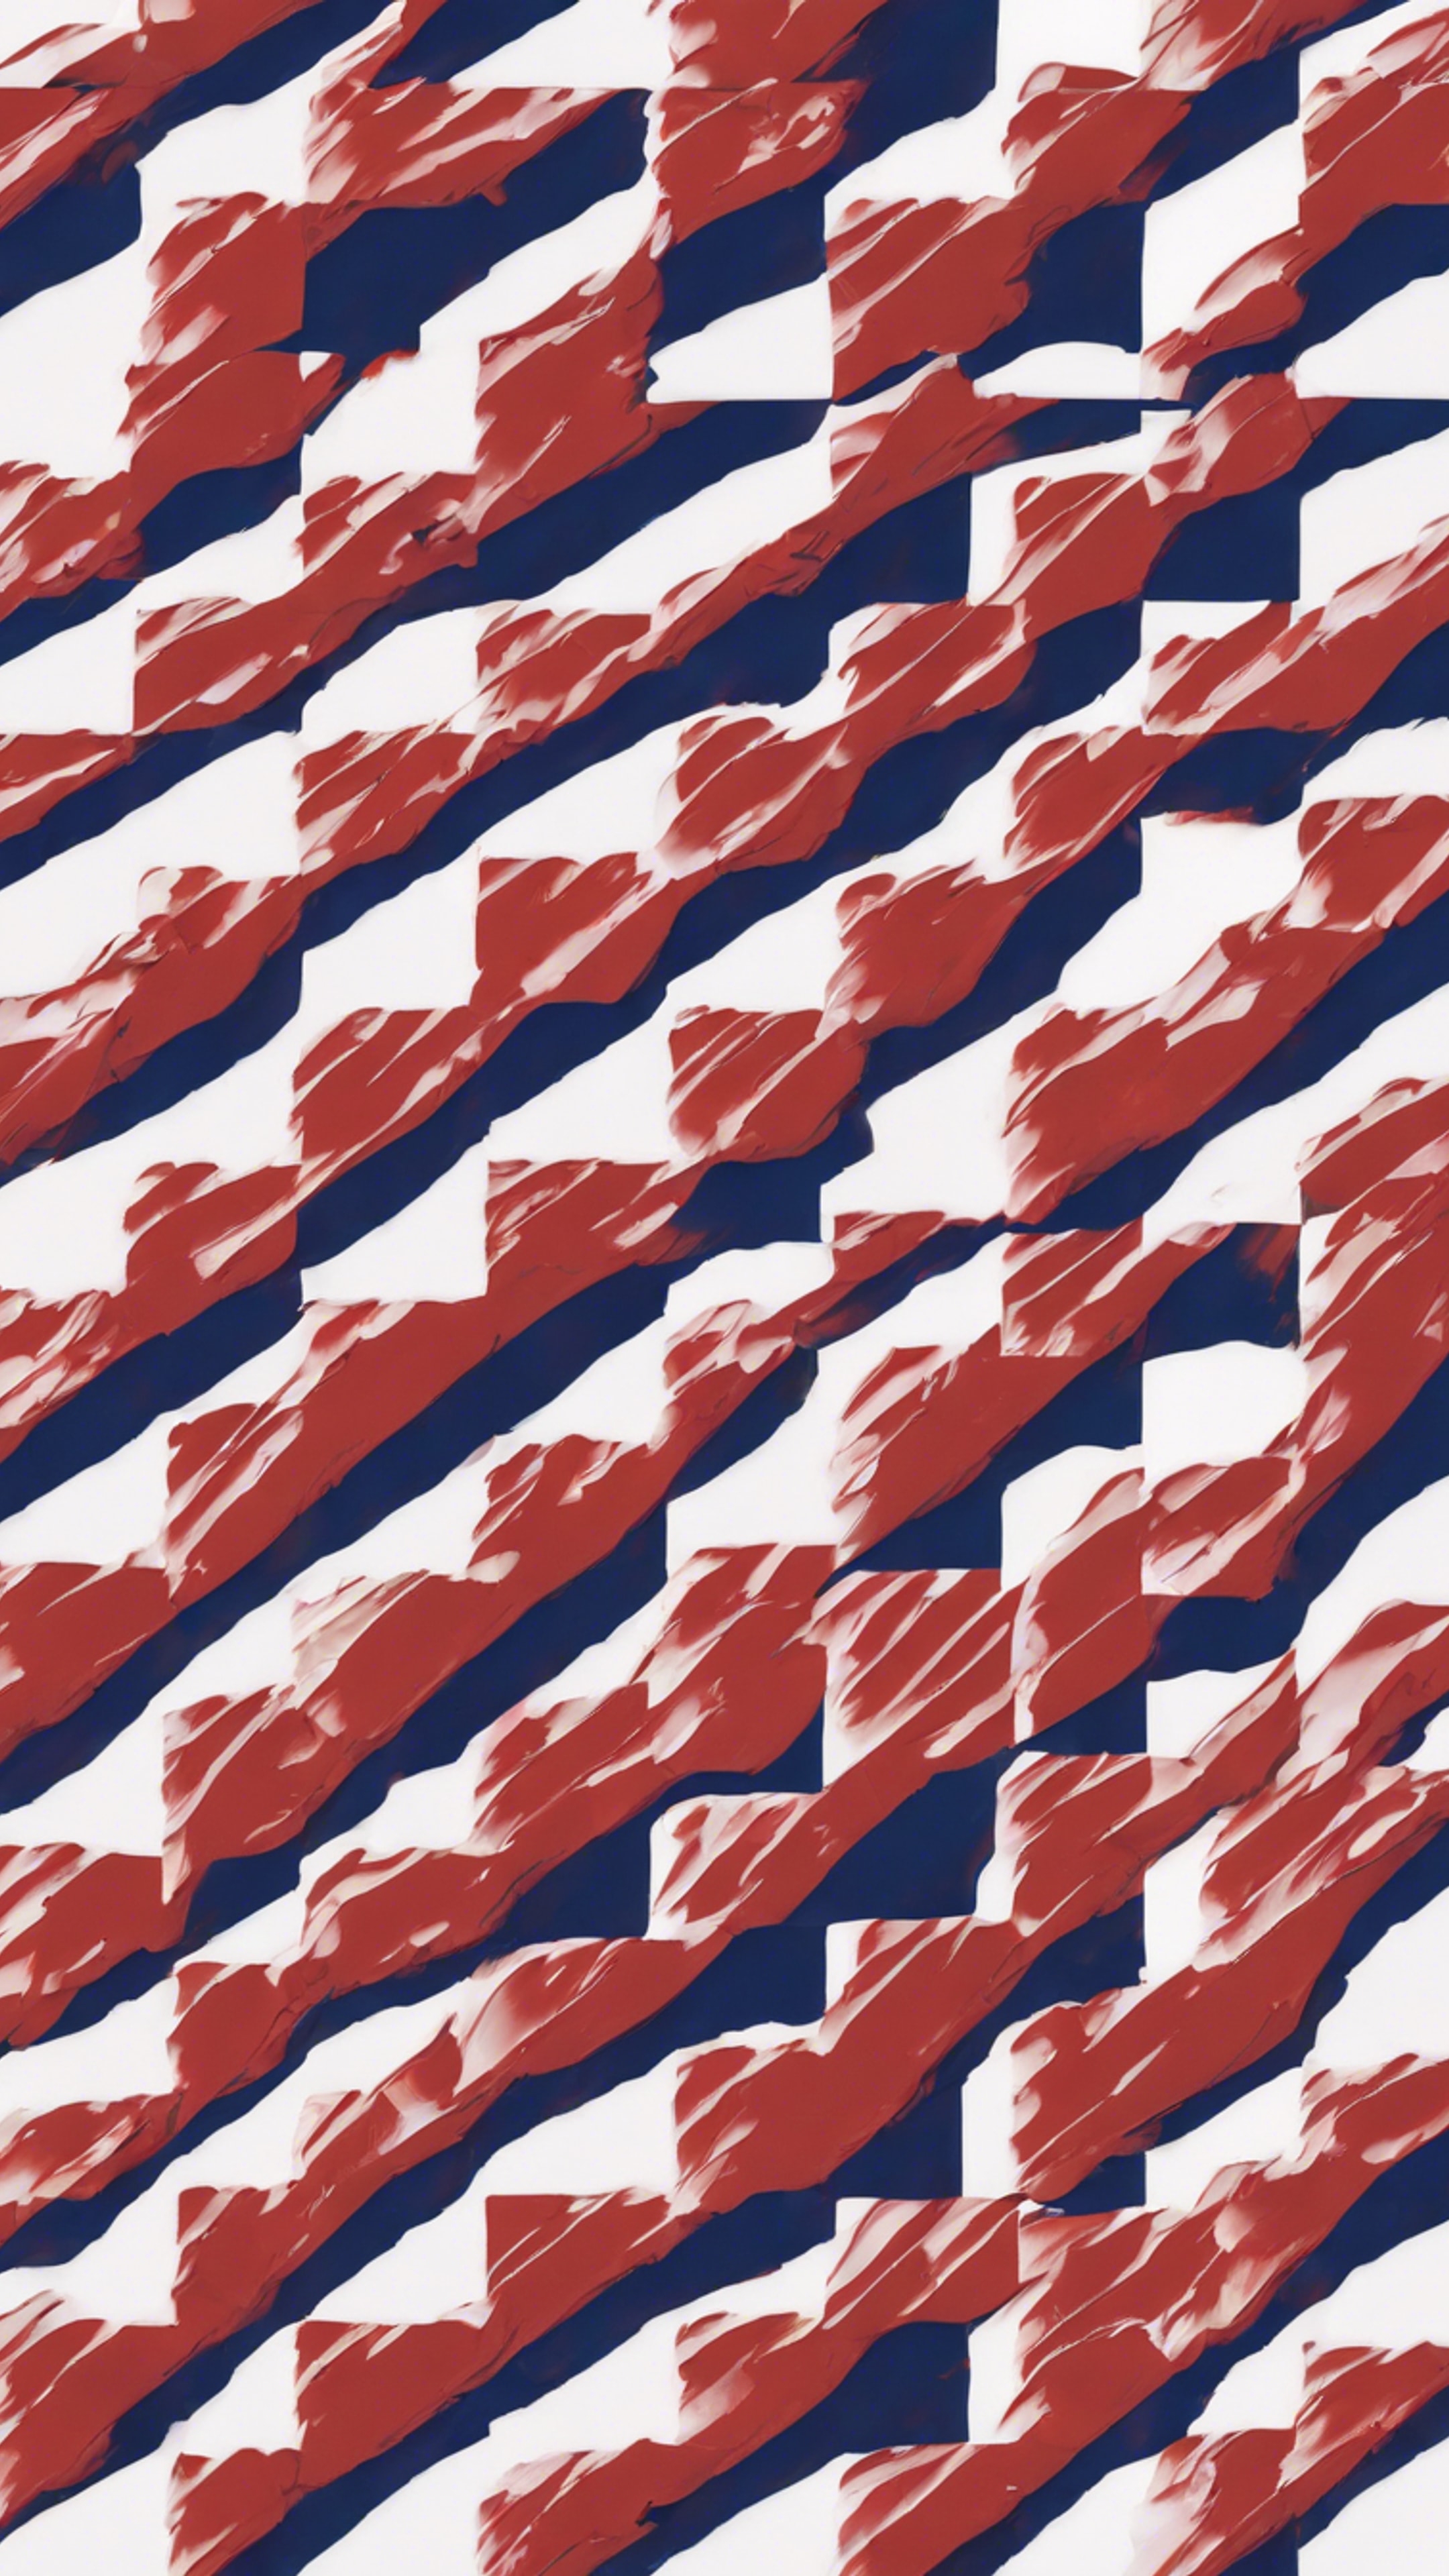 Red and navy checkered pattern running diagonally. Wallpaper[9dd6ce1238554ca9a6a4]